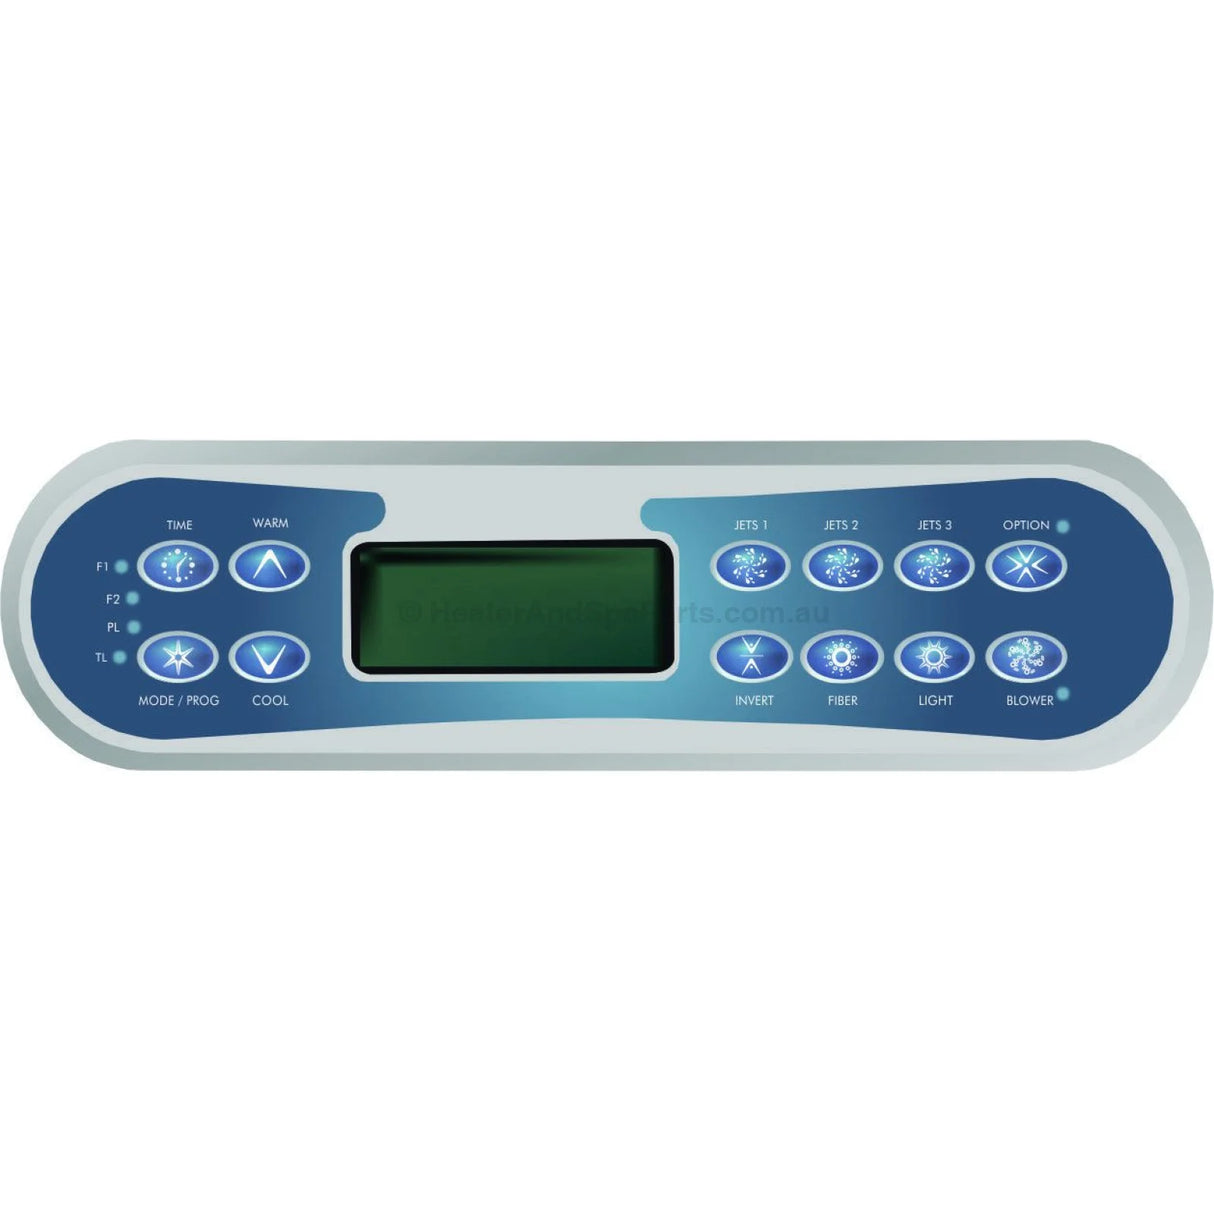 Balboa ML900 Touchpad - 12-Button Keypad Control Panel - Heater and Spa Parts